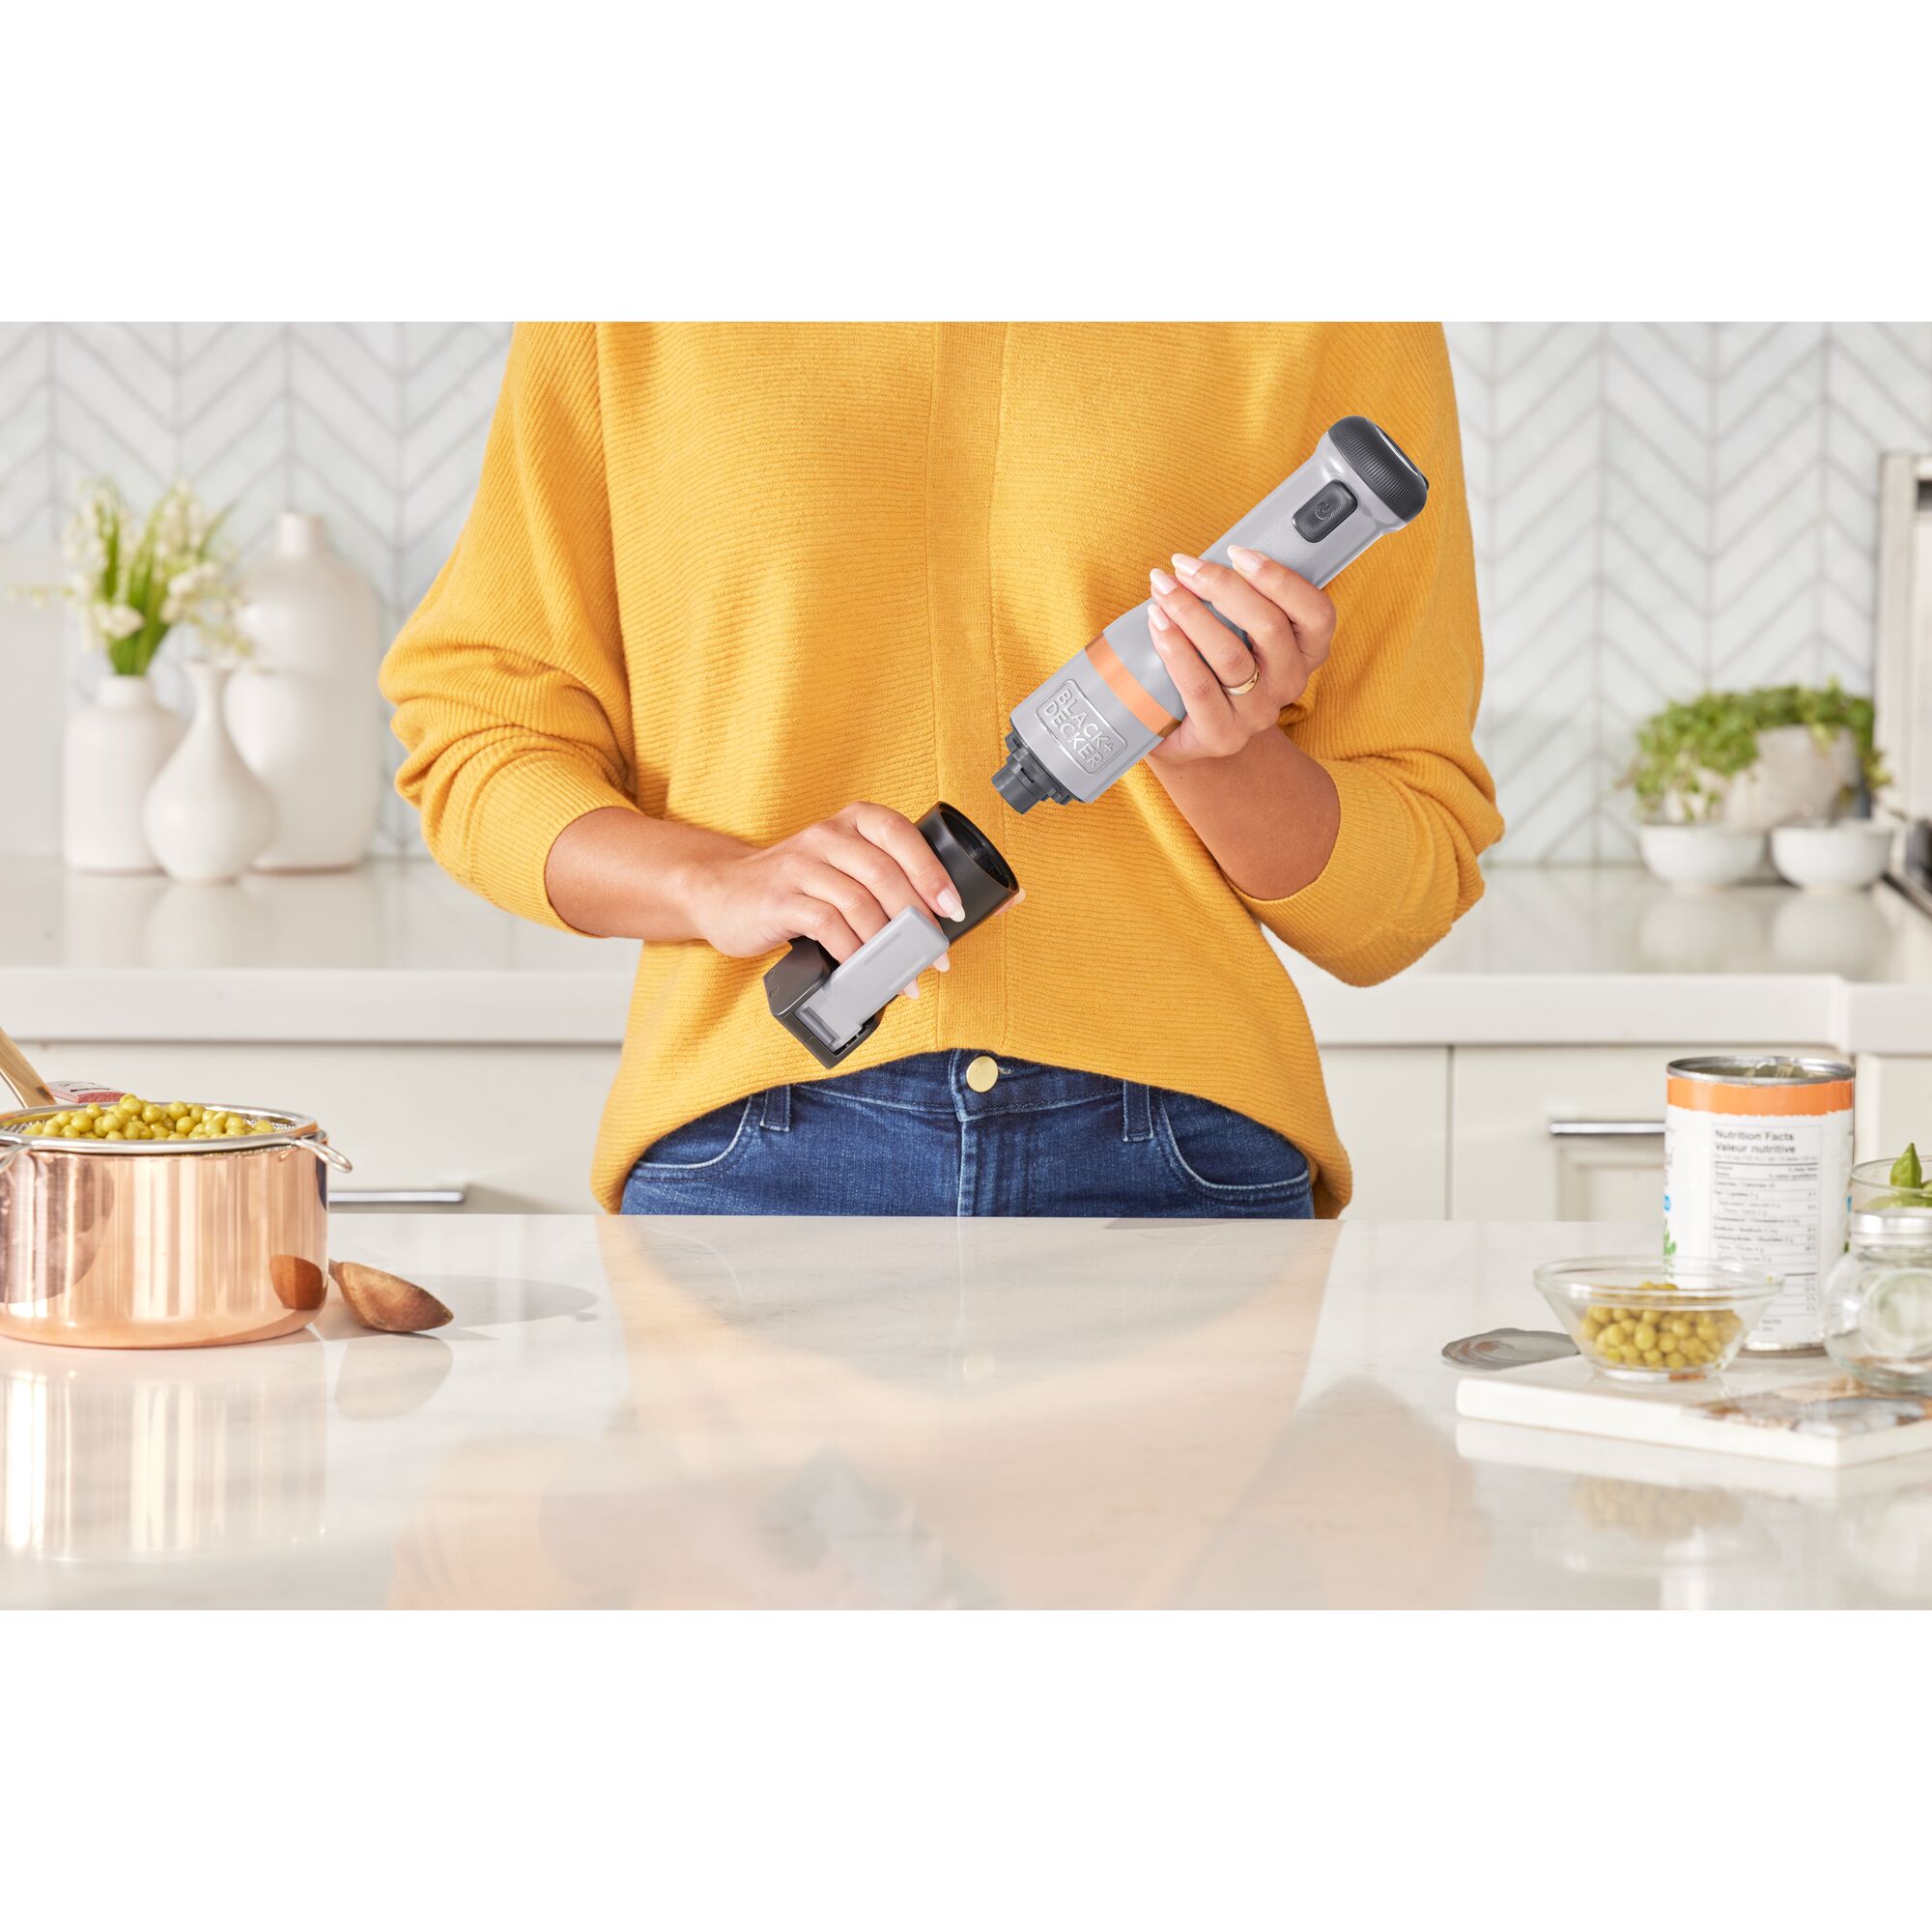 Talent showing how to attach the BLACK+DECKER kitchen wand can opener attachment to the grey power unit